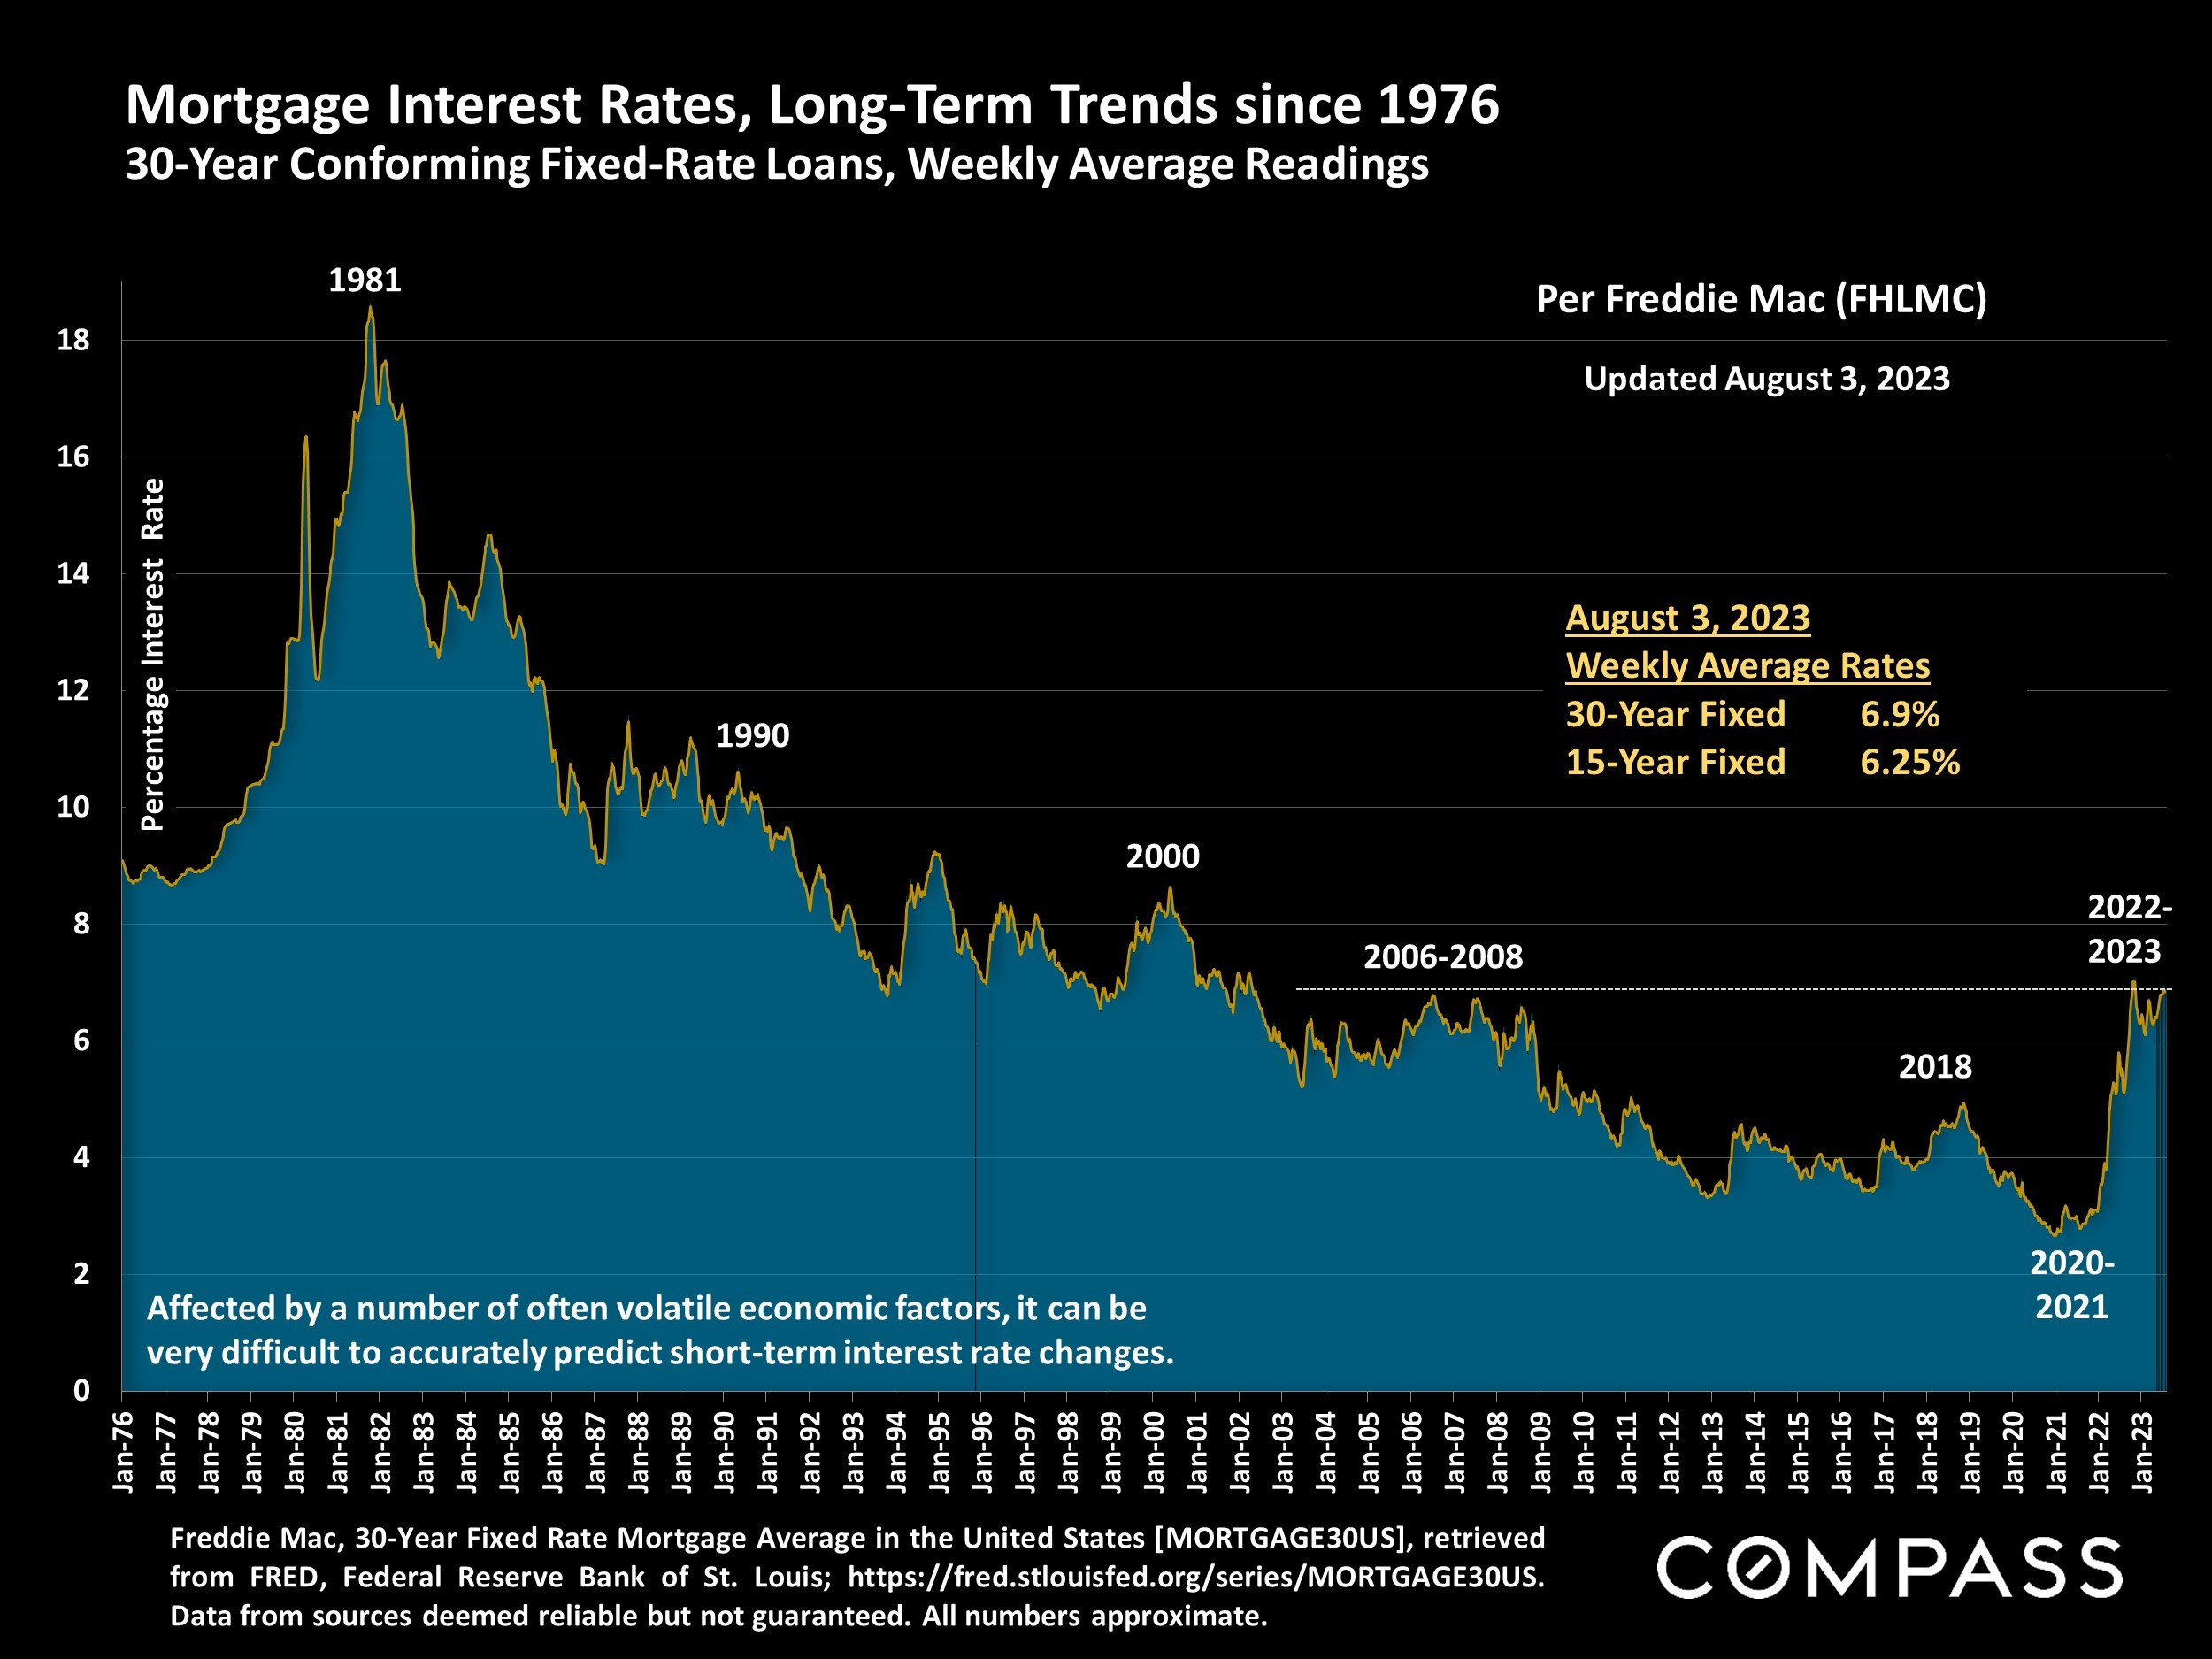 Mortgage interest rates since 1976